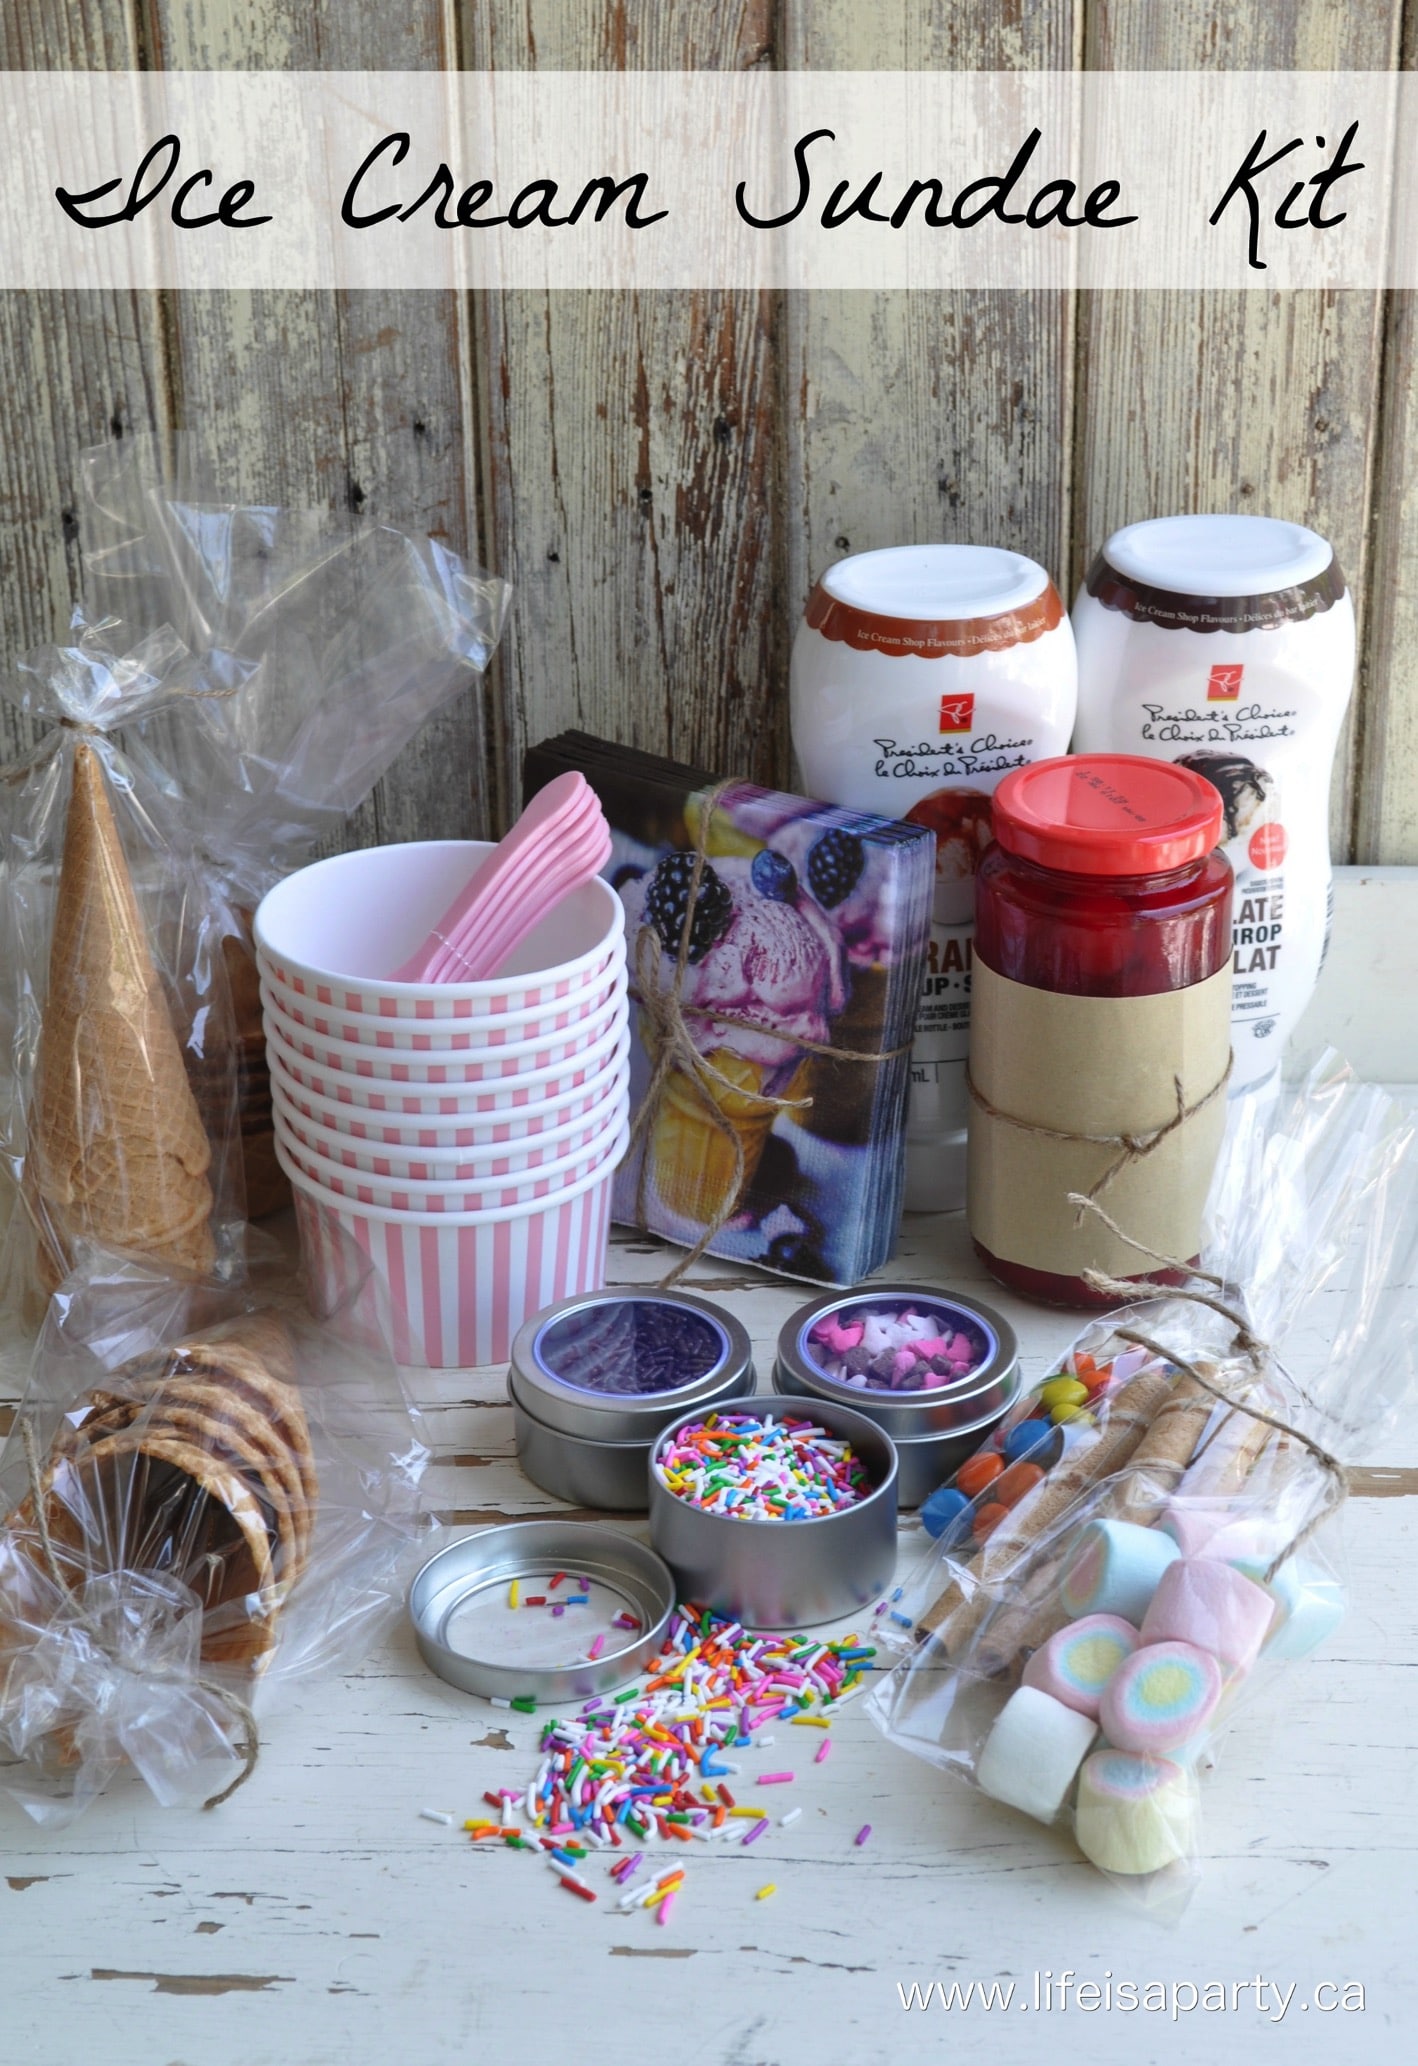 Ice Cream Sundae Kit: Perfect for summer gift giving. Wrap up your favourite ice cream toppings, sauces, cherries, ice cream cones, and ice cream.